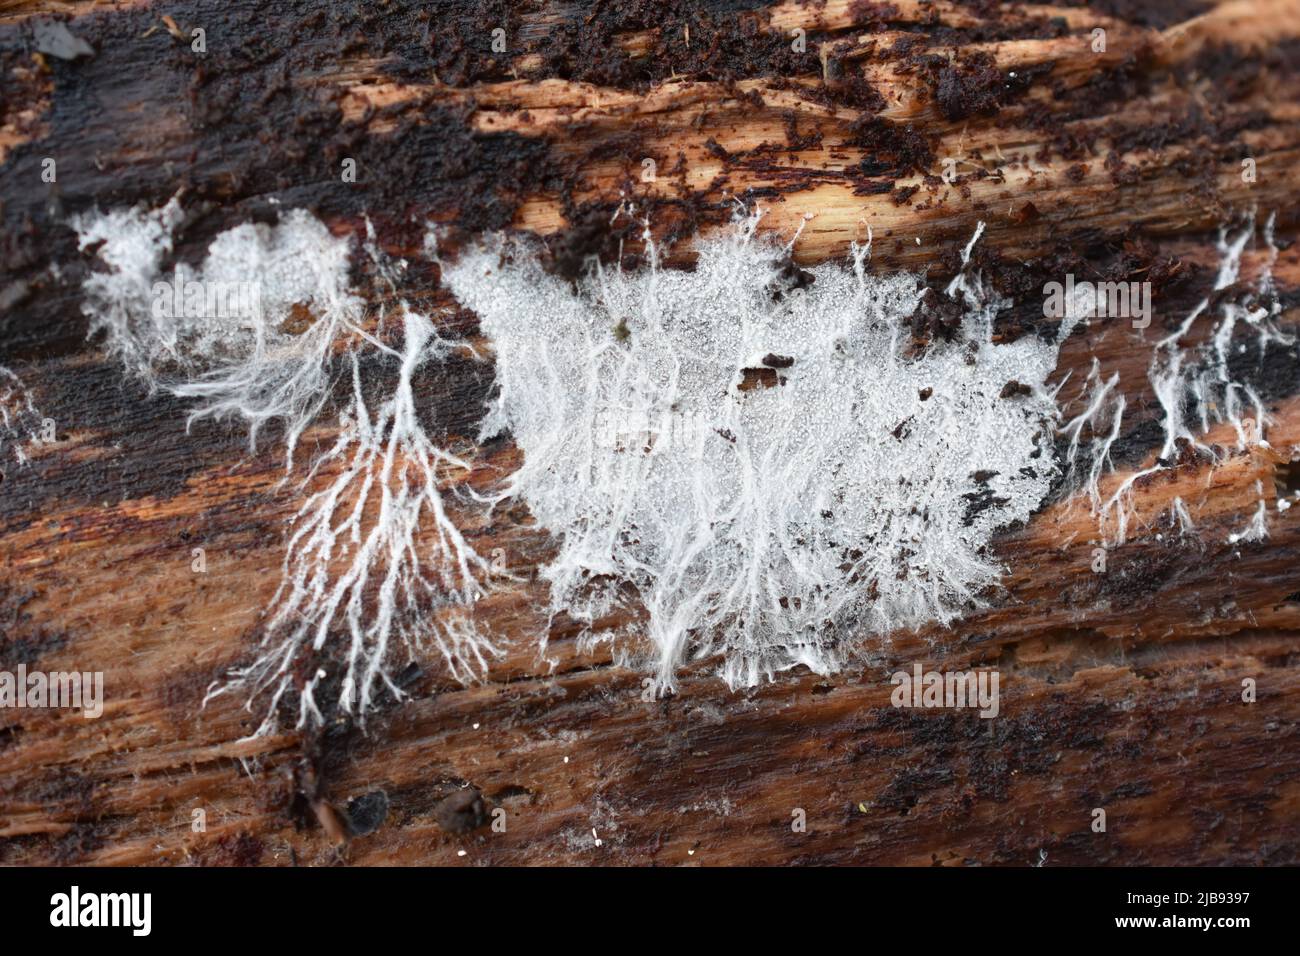 Fungus mycelium growing on a decaying trunk Stock Photo